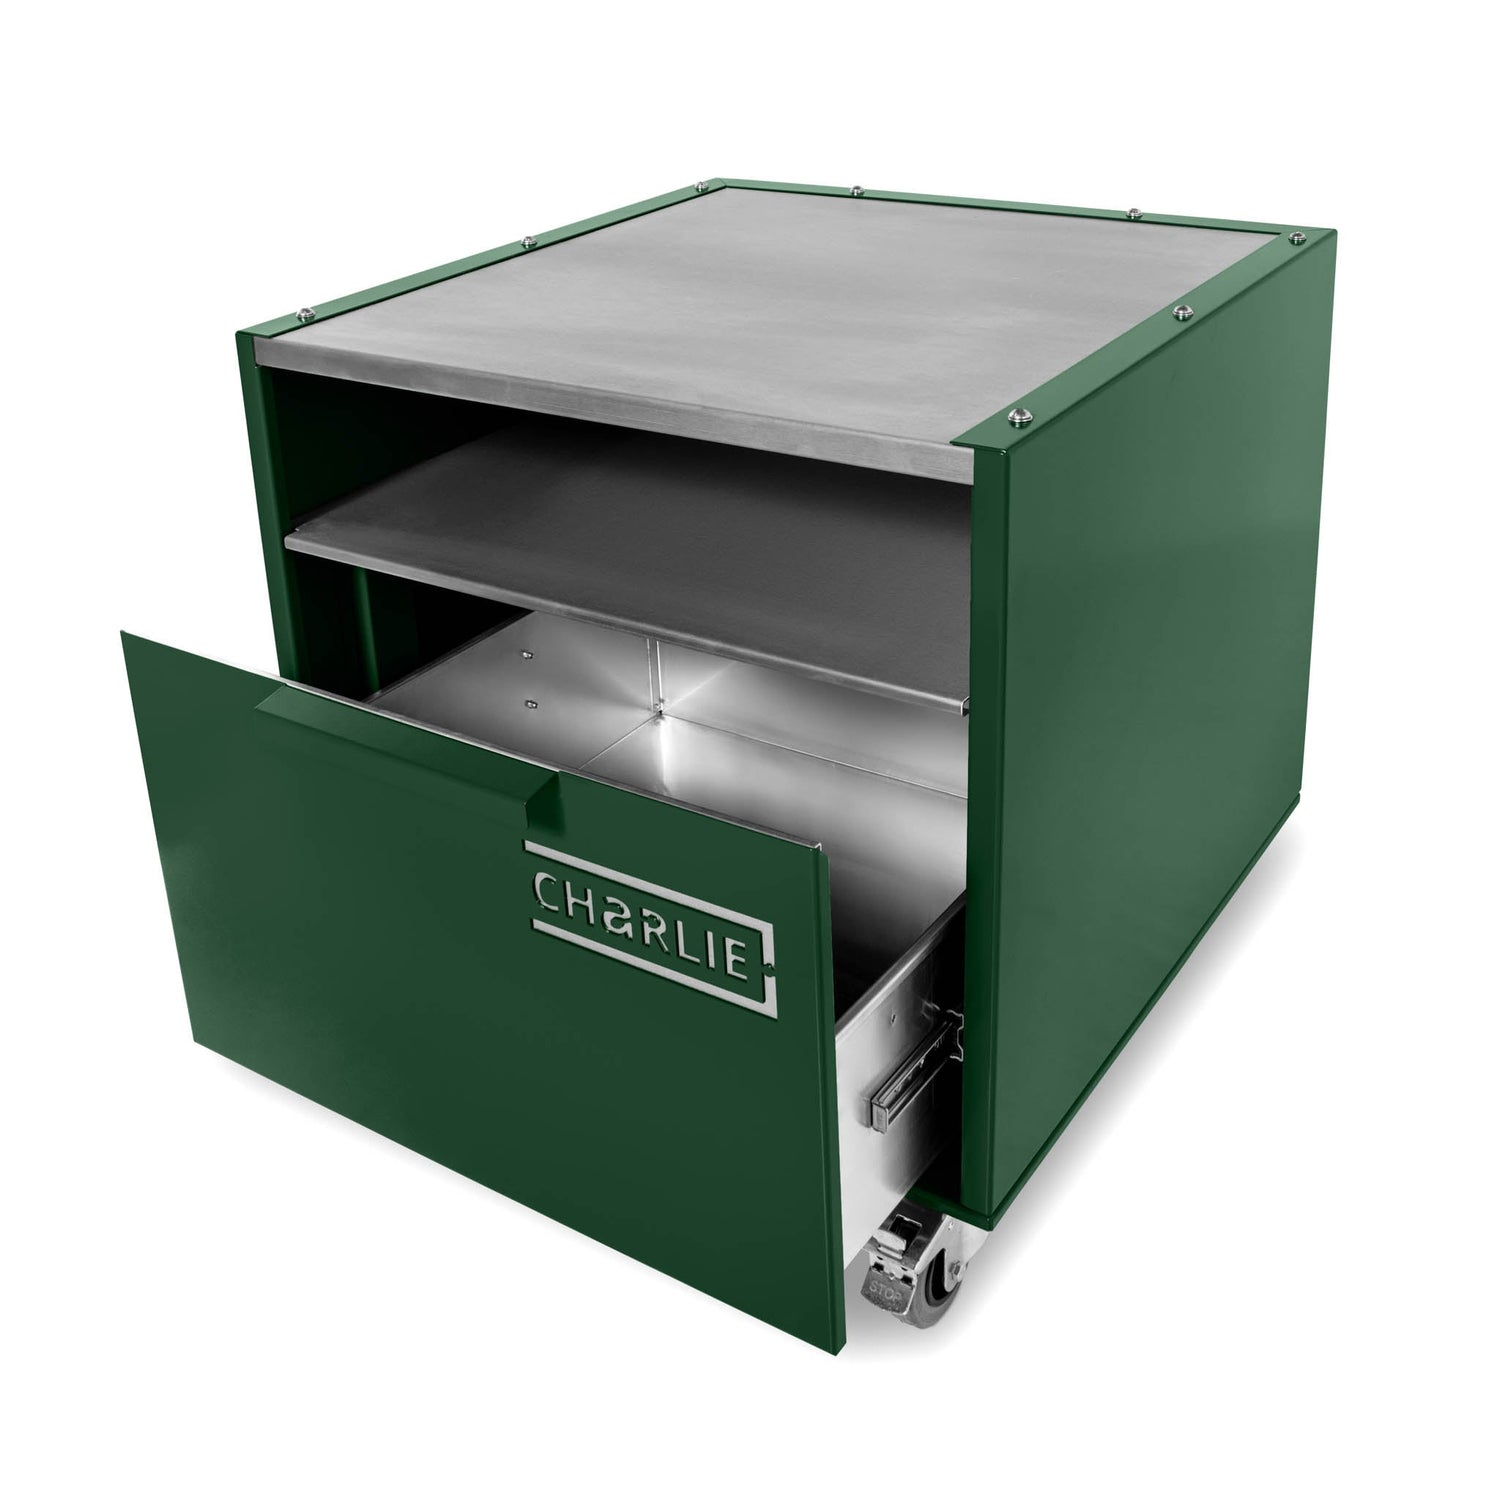 Cheeky Charlie Oven Base Cabinet - Charlie Oven